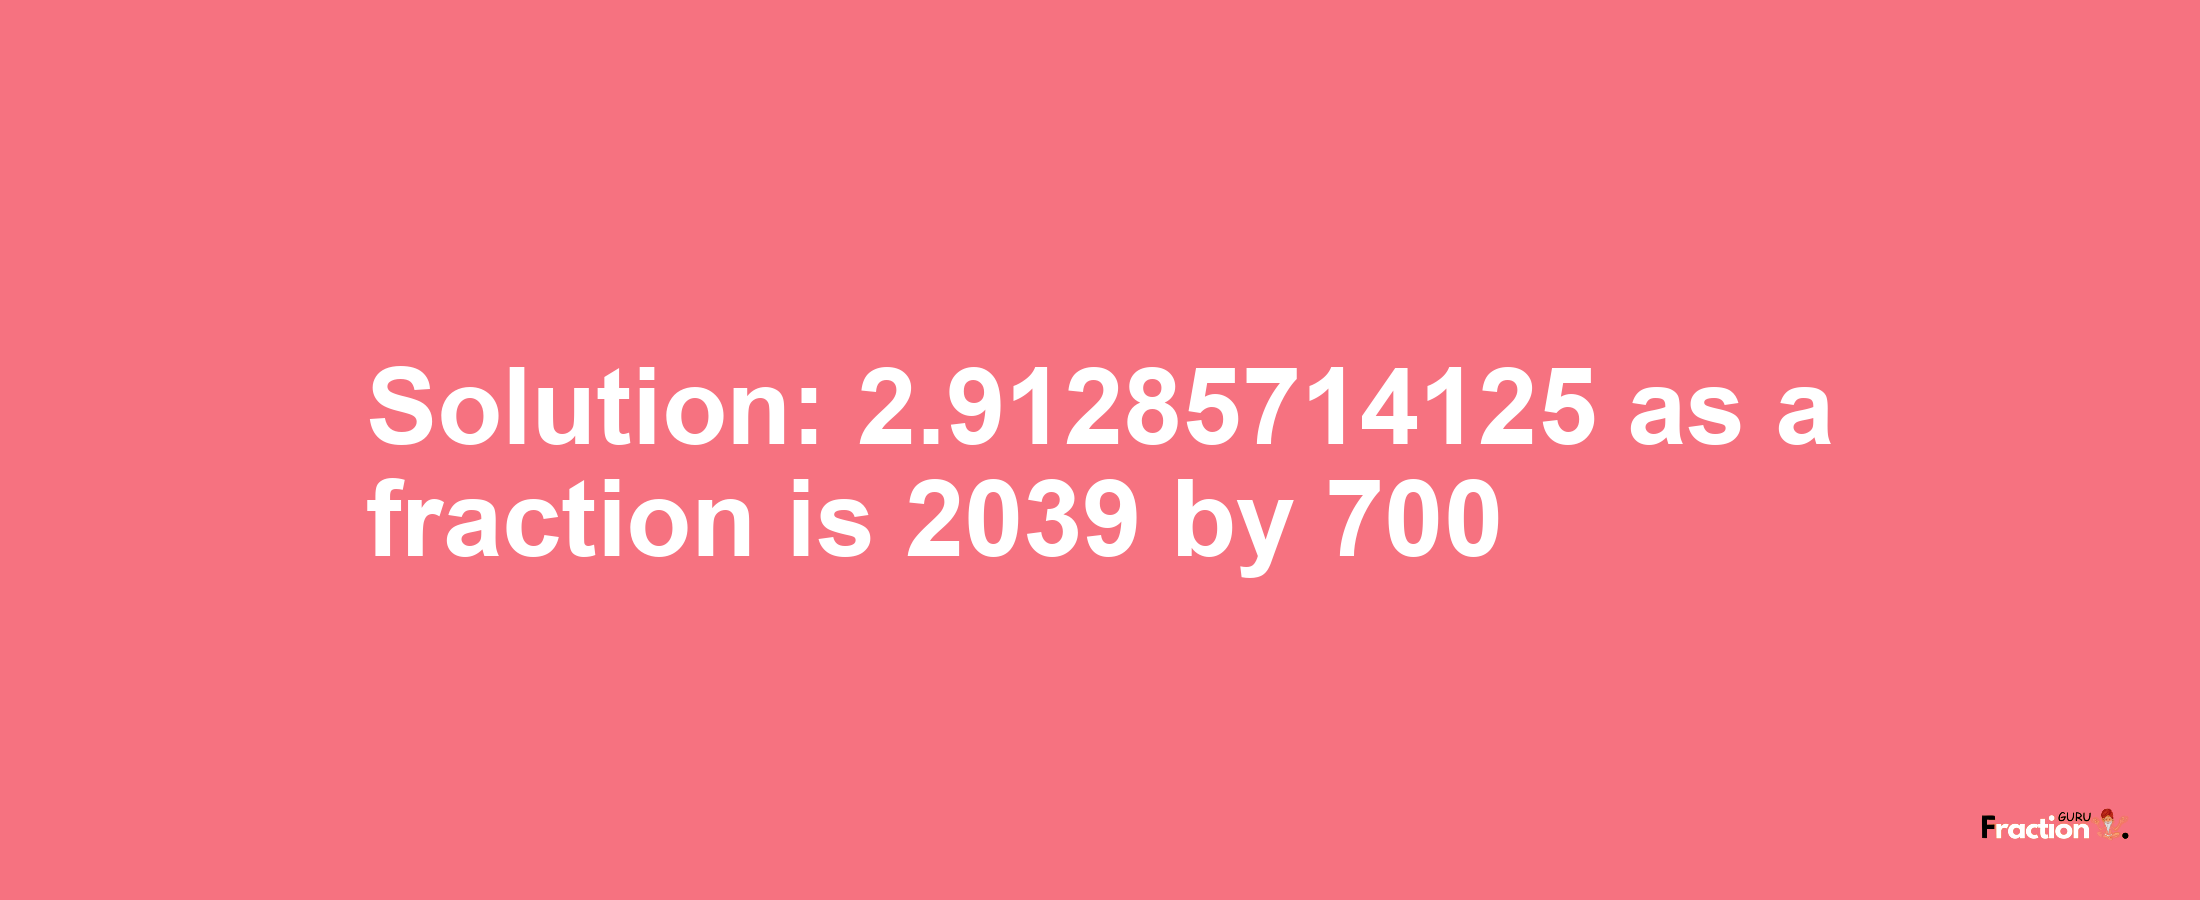 Solution:2.91285714125 as a fraction is 2039/700